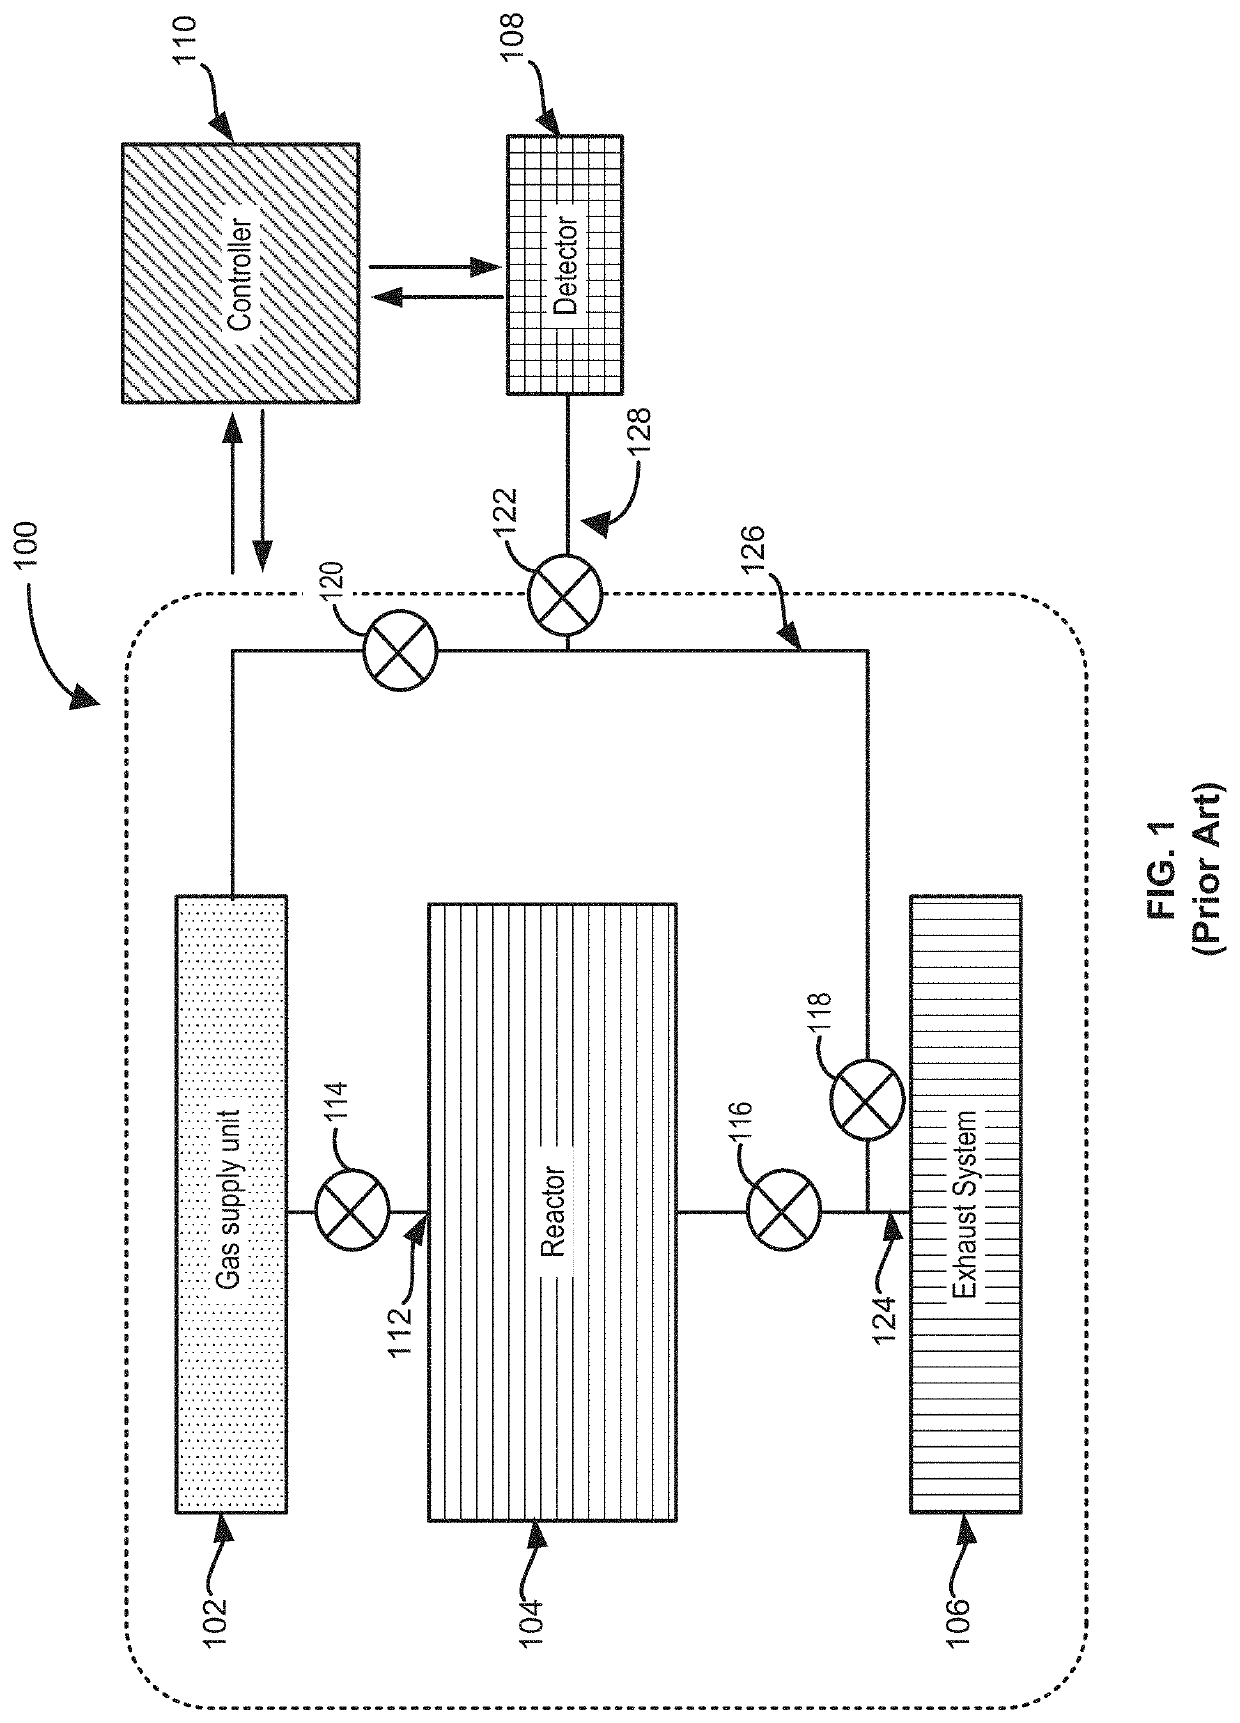 Method of using a gas-phase reactor system including analyzing exhausted gas